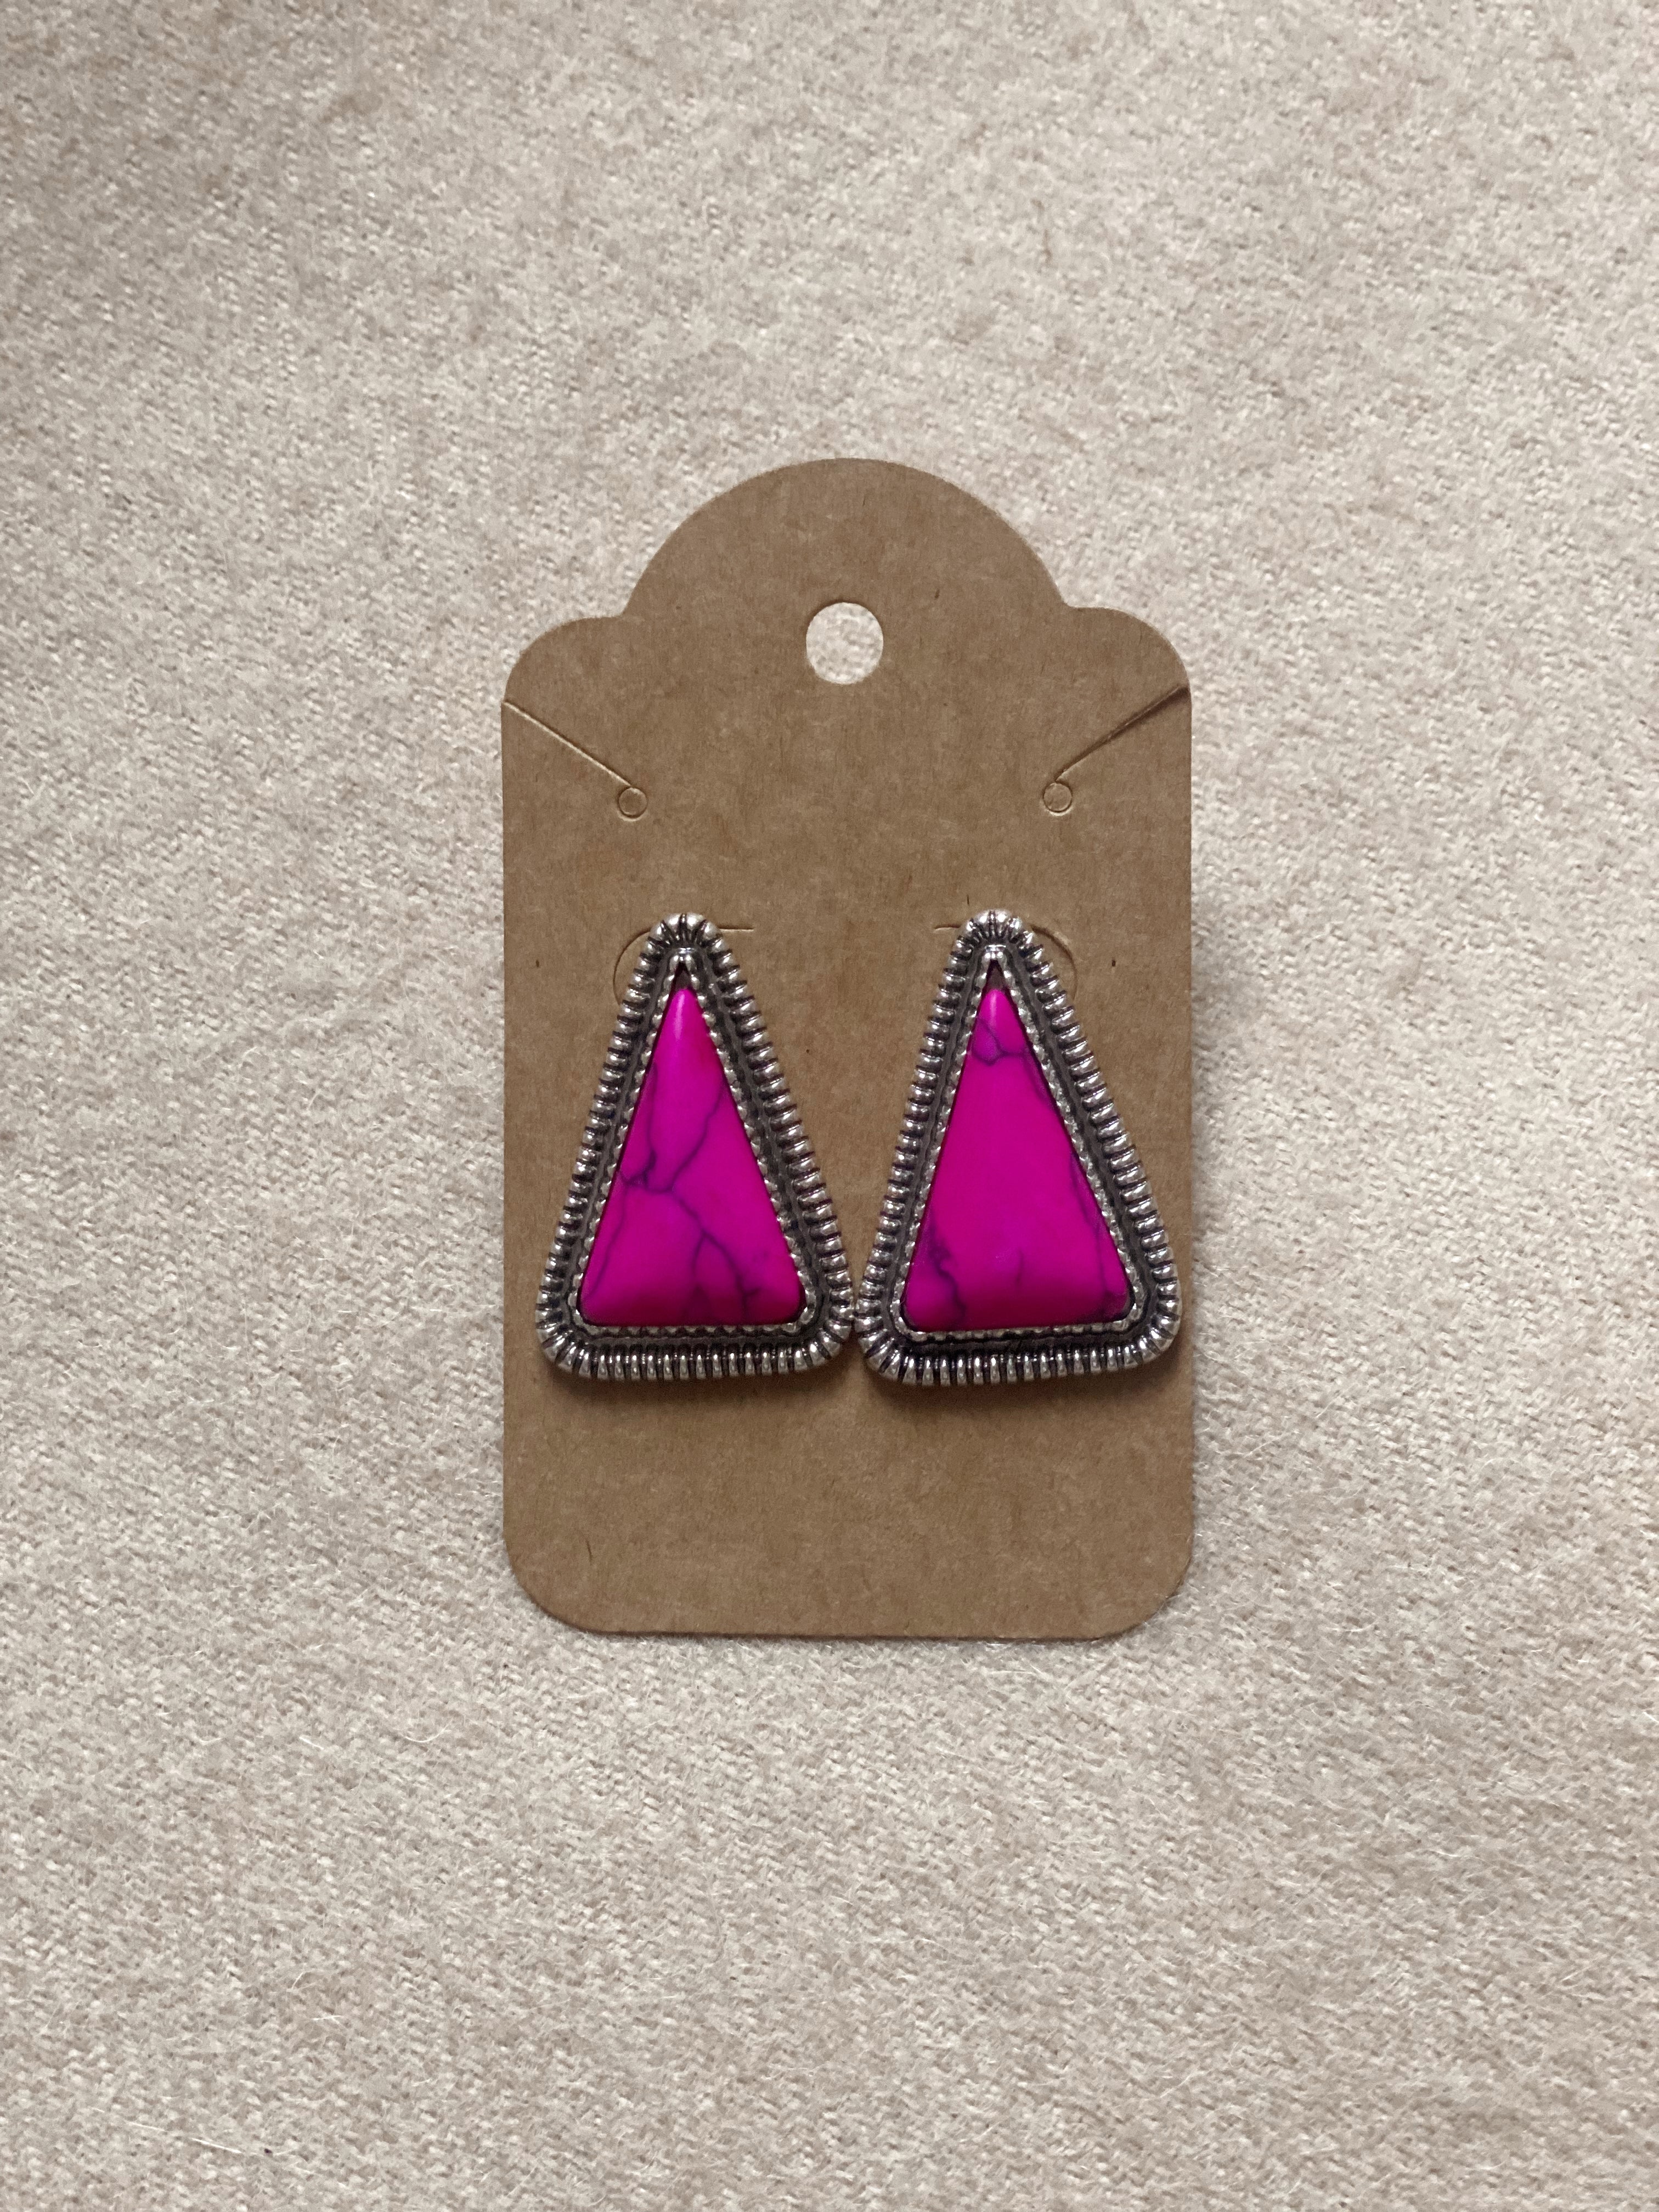 Pink Stone Triangle Stud Earrings Turquoise Traveler 